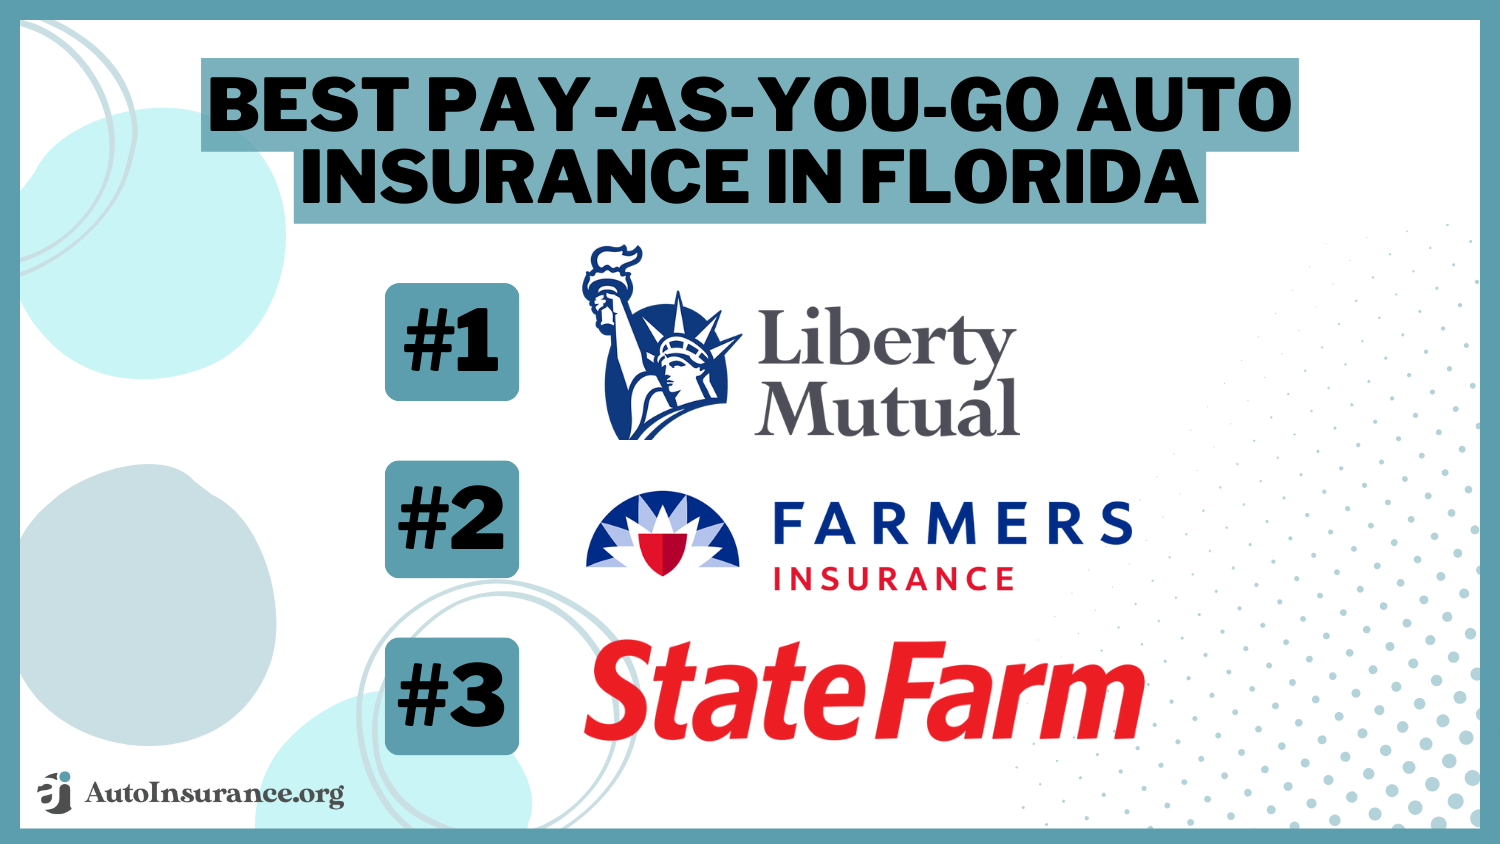 Best Pay-As-You-Go Auto Insurance in Florida: Liberty Mutual, Farmers, state Farm